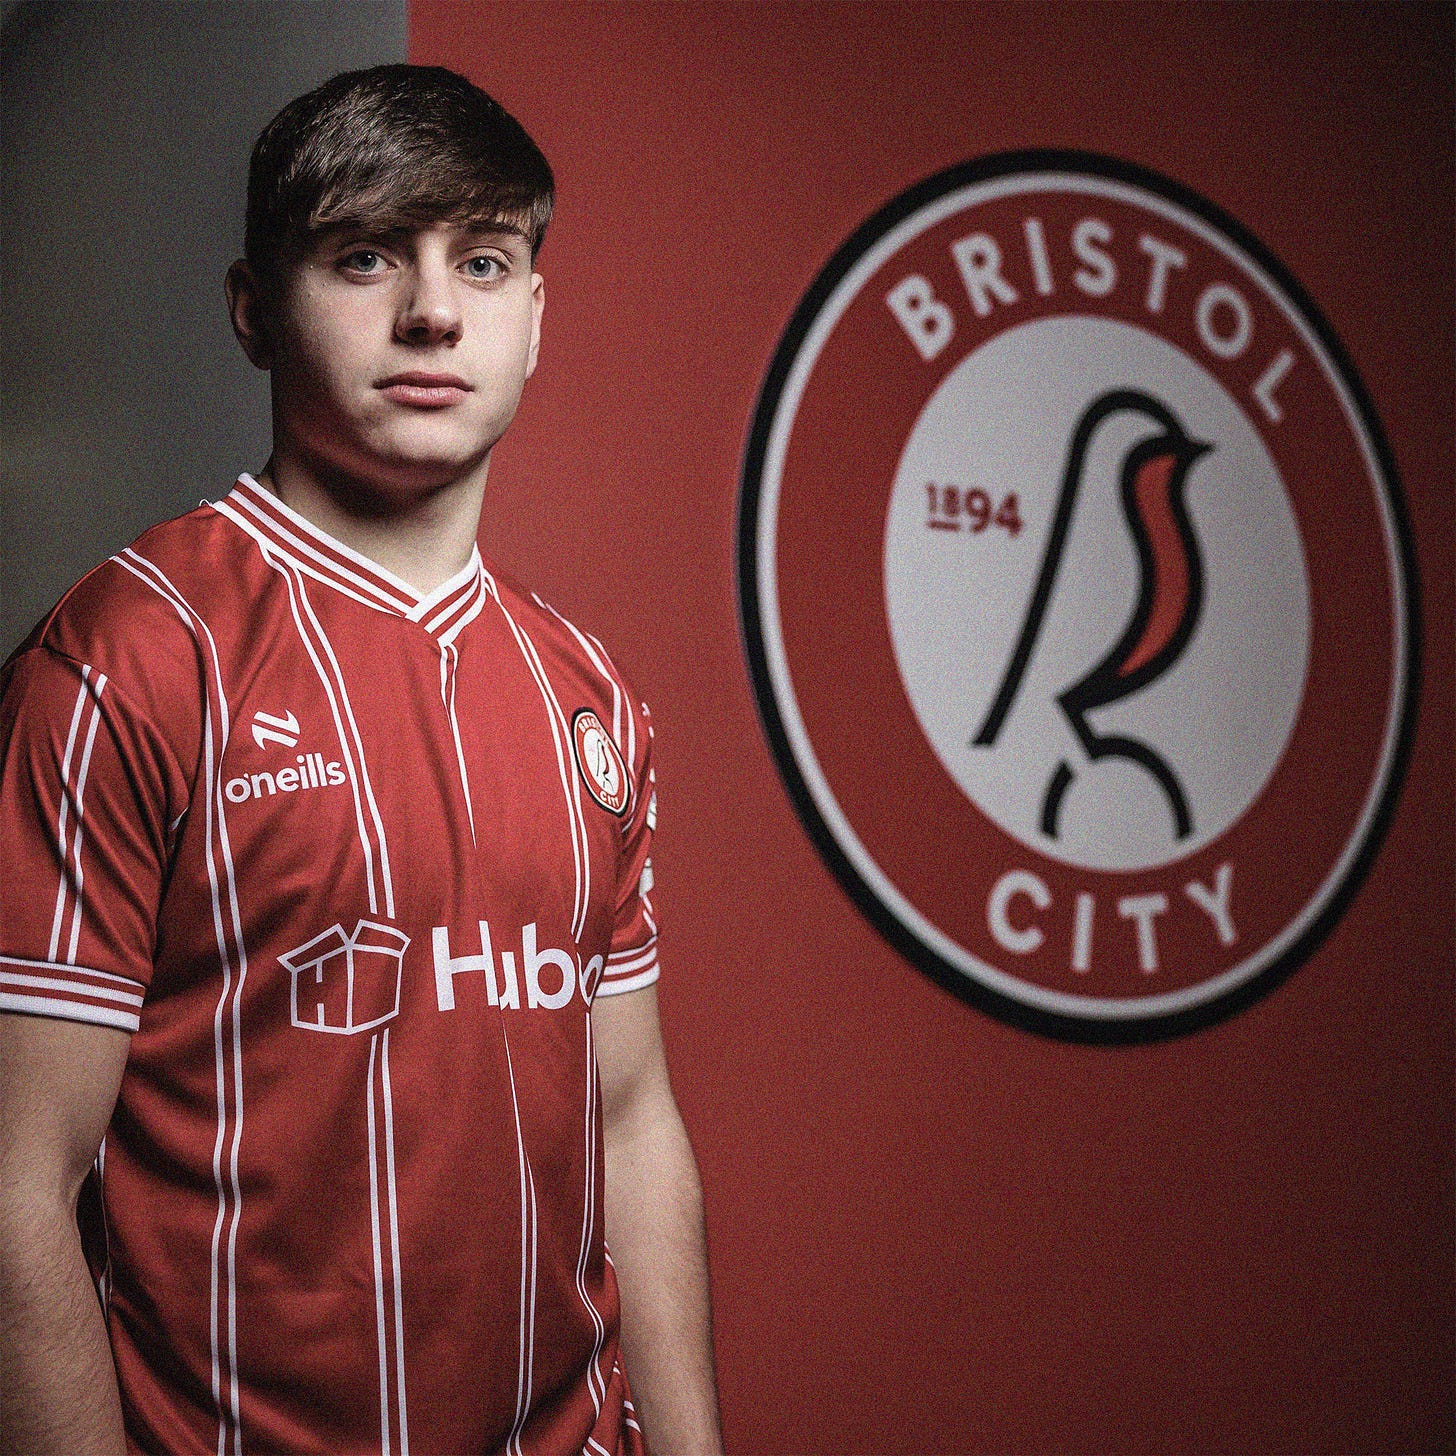 A photo of Josh Stokes wearing a Bristol City shirt while stood in front of a red wall which has the Bristol City crest on it. He's looking directly at the camera. Photo courtesy of Bristol City.